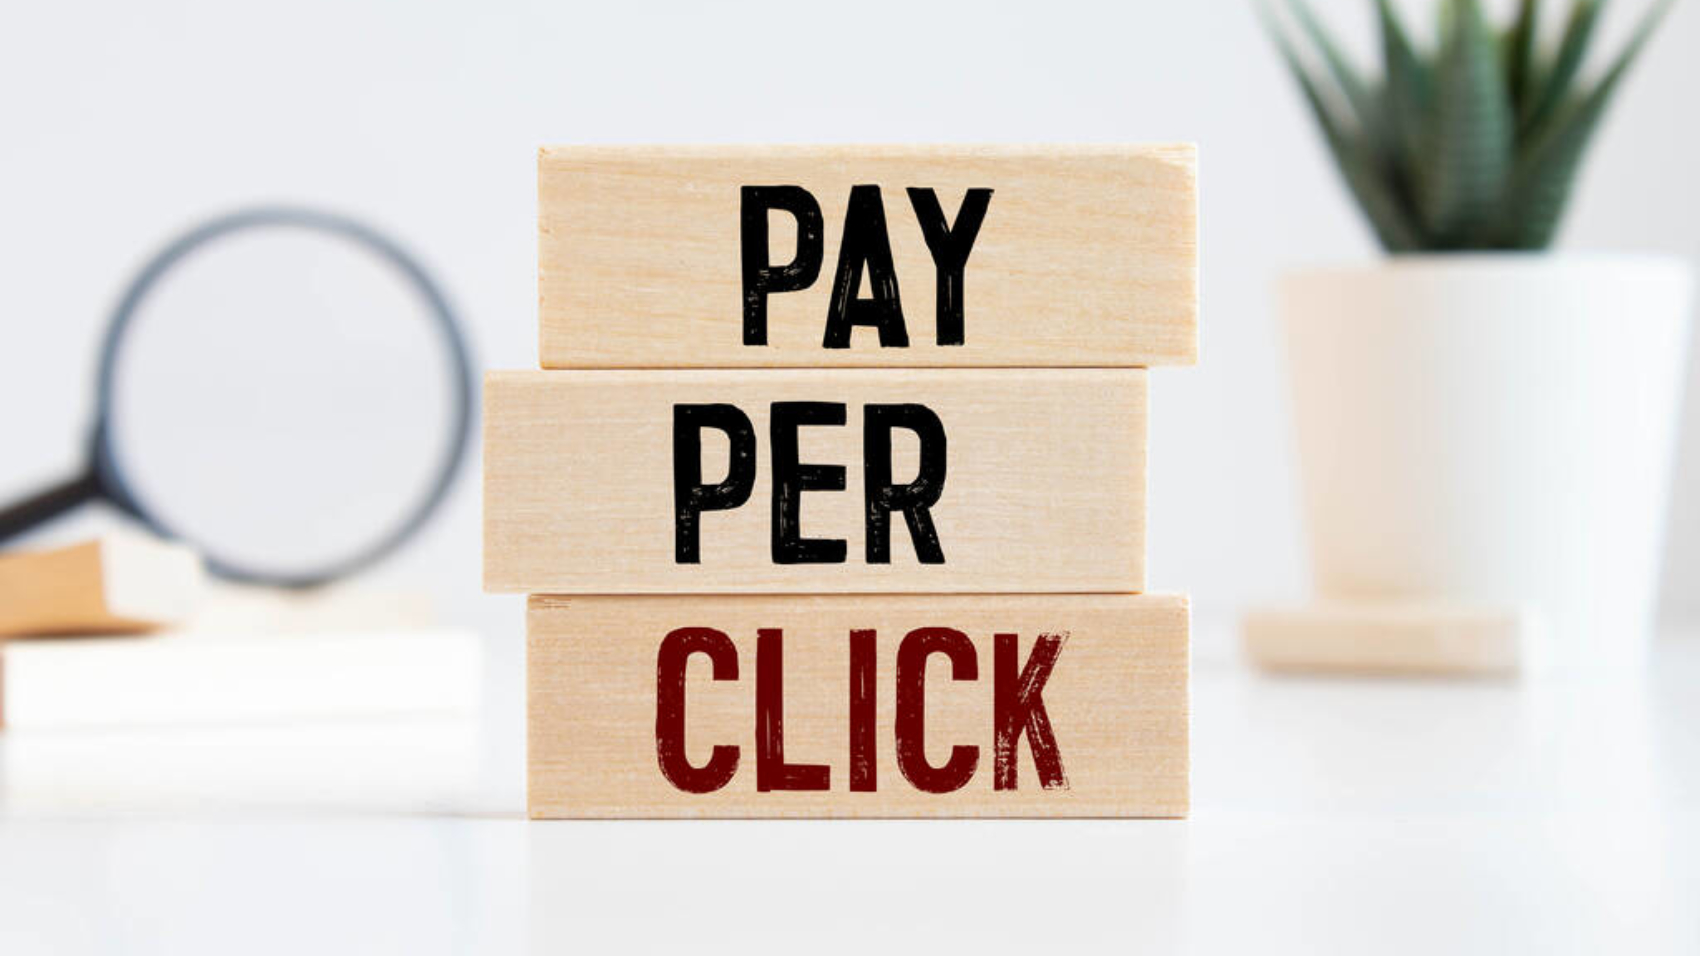 PPC Pay Per Click text on dices on wooden background.